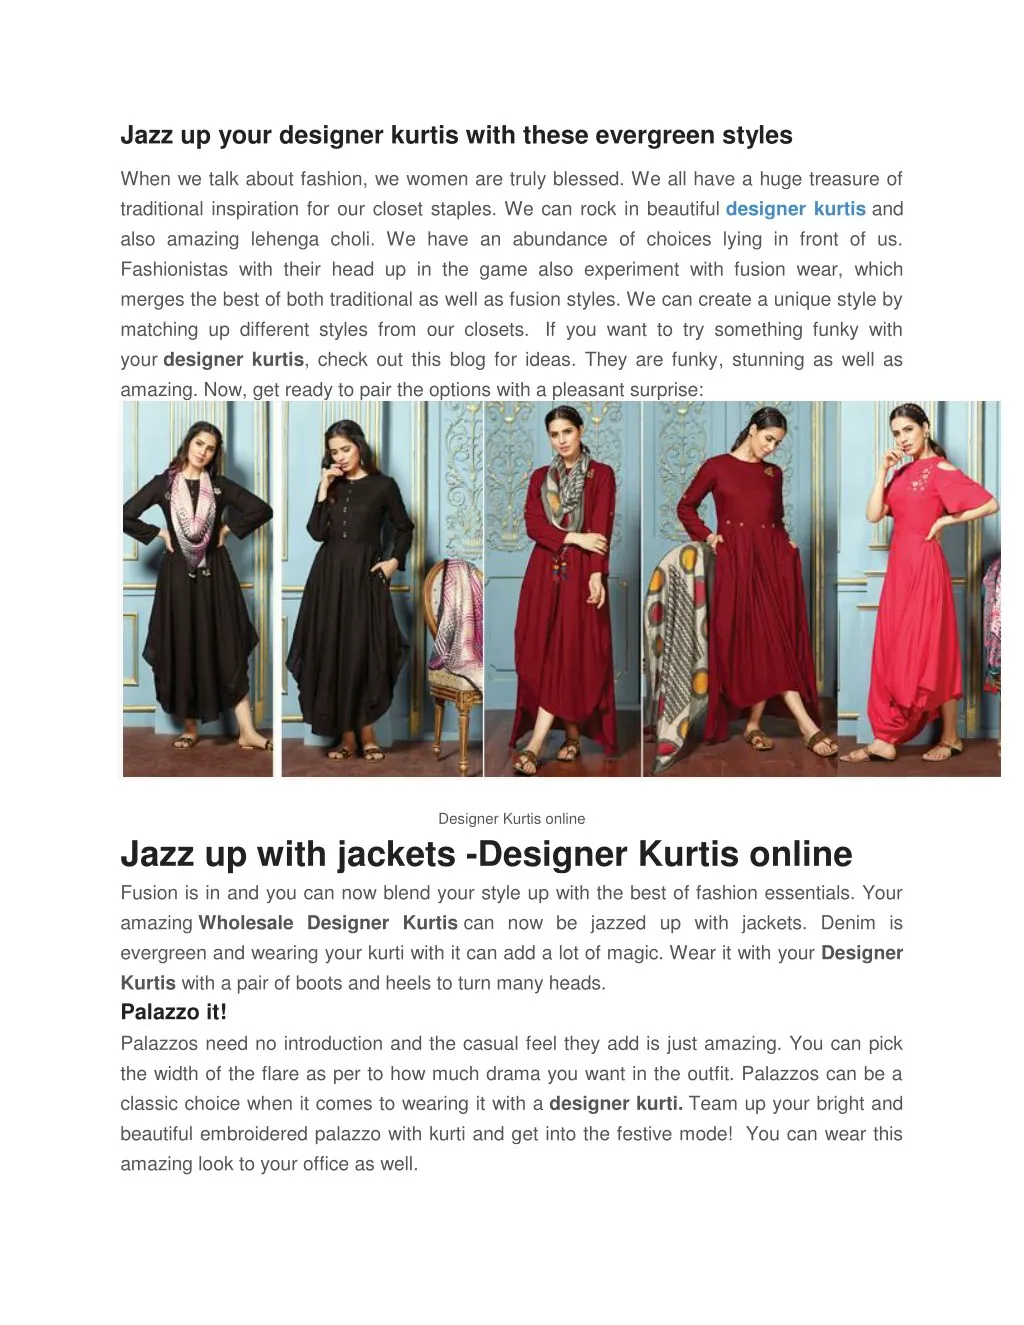 jazz up your designer kurtis with these evergreen